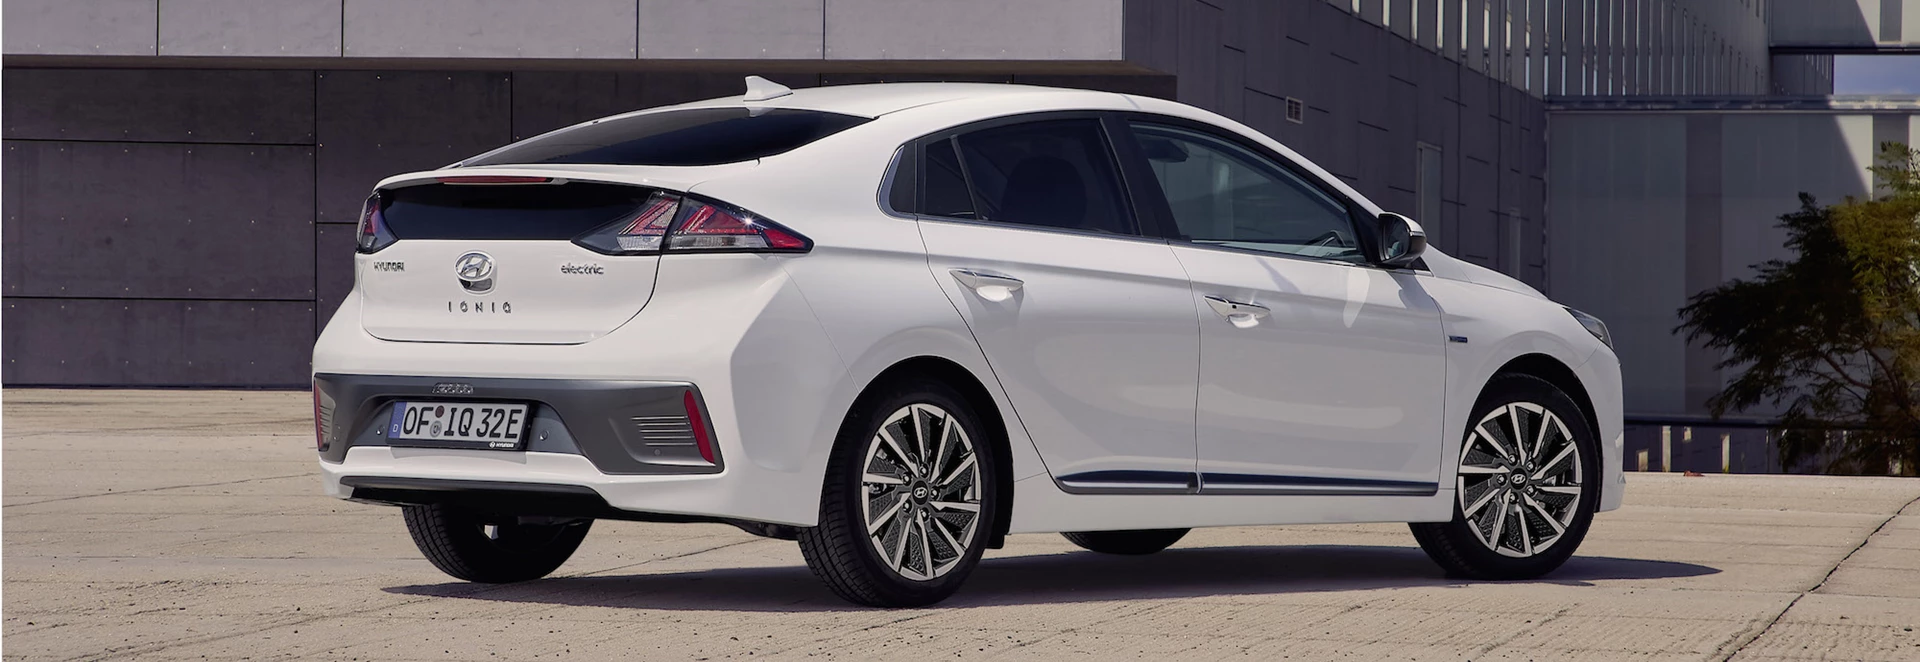 Five reasons why the new Hyundai IONIQ is better than ever